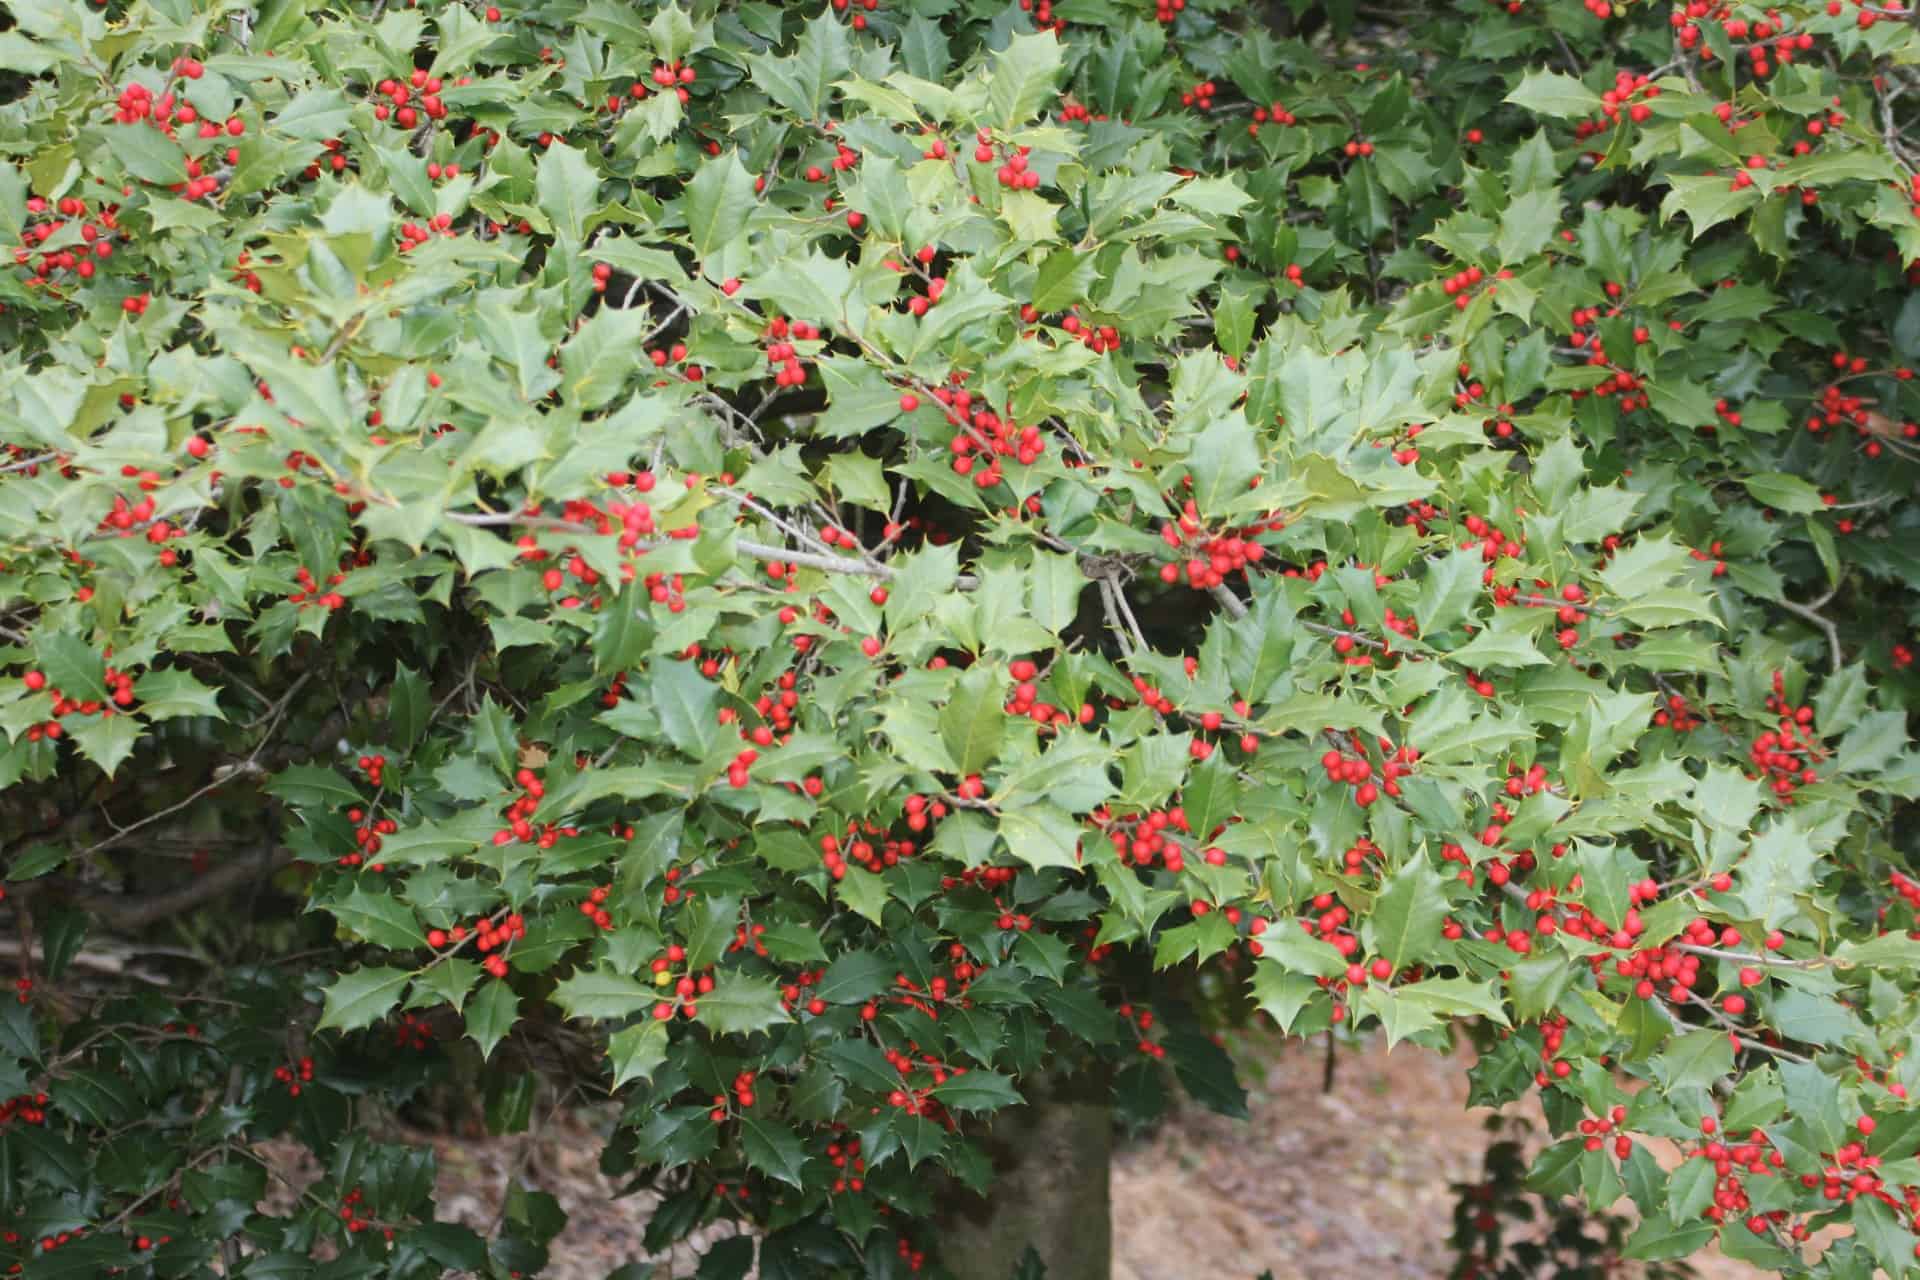 American holly is popular with the birds